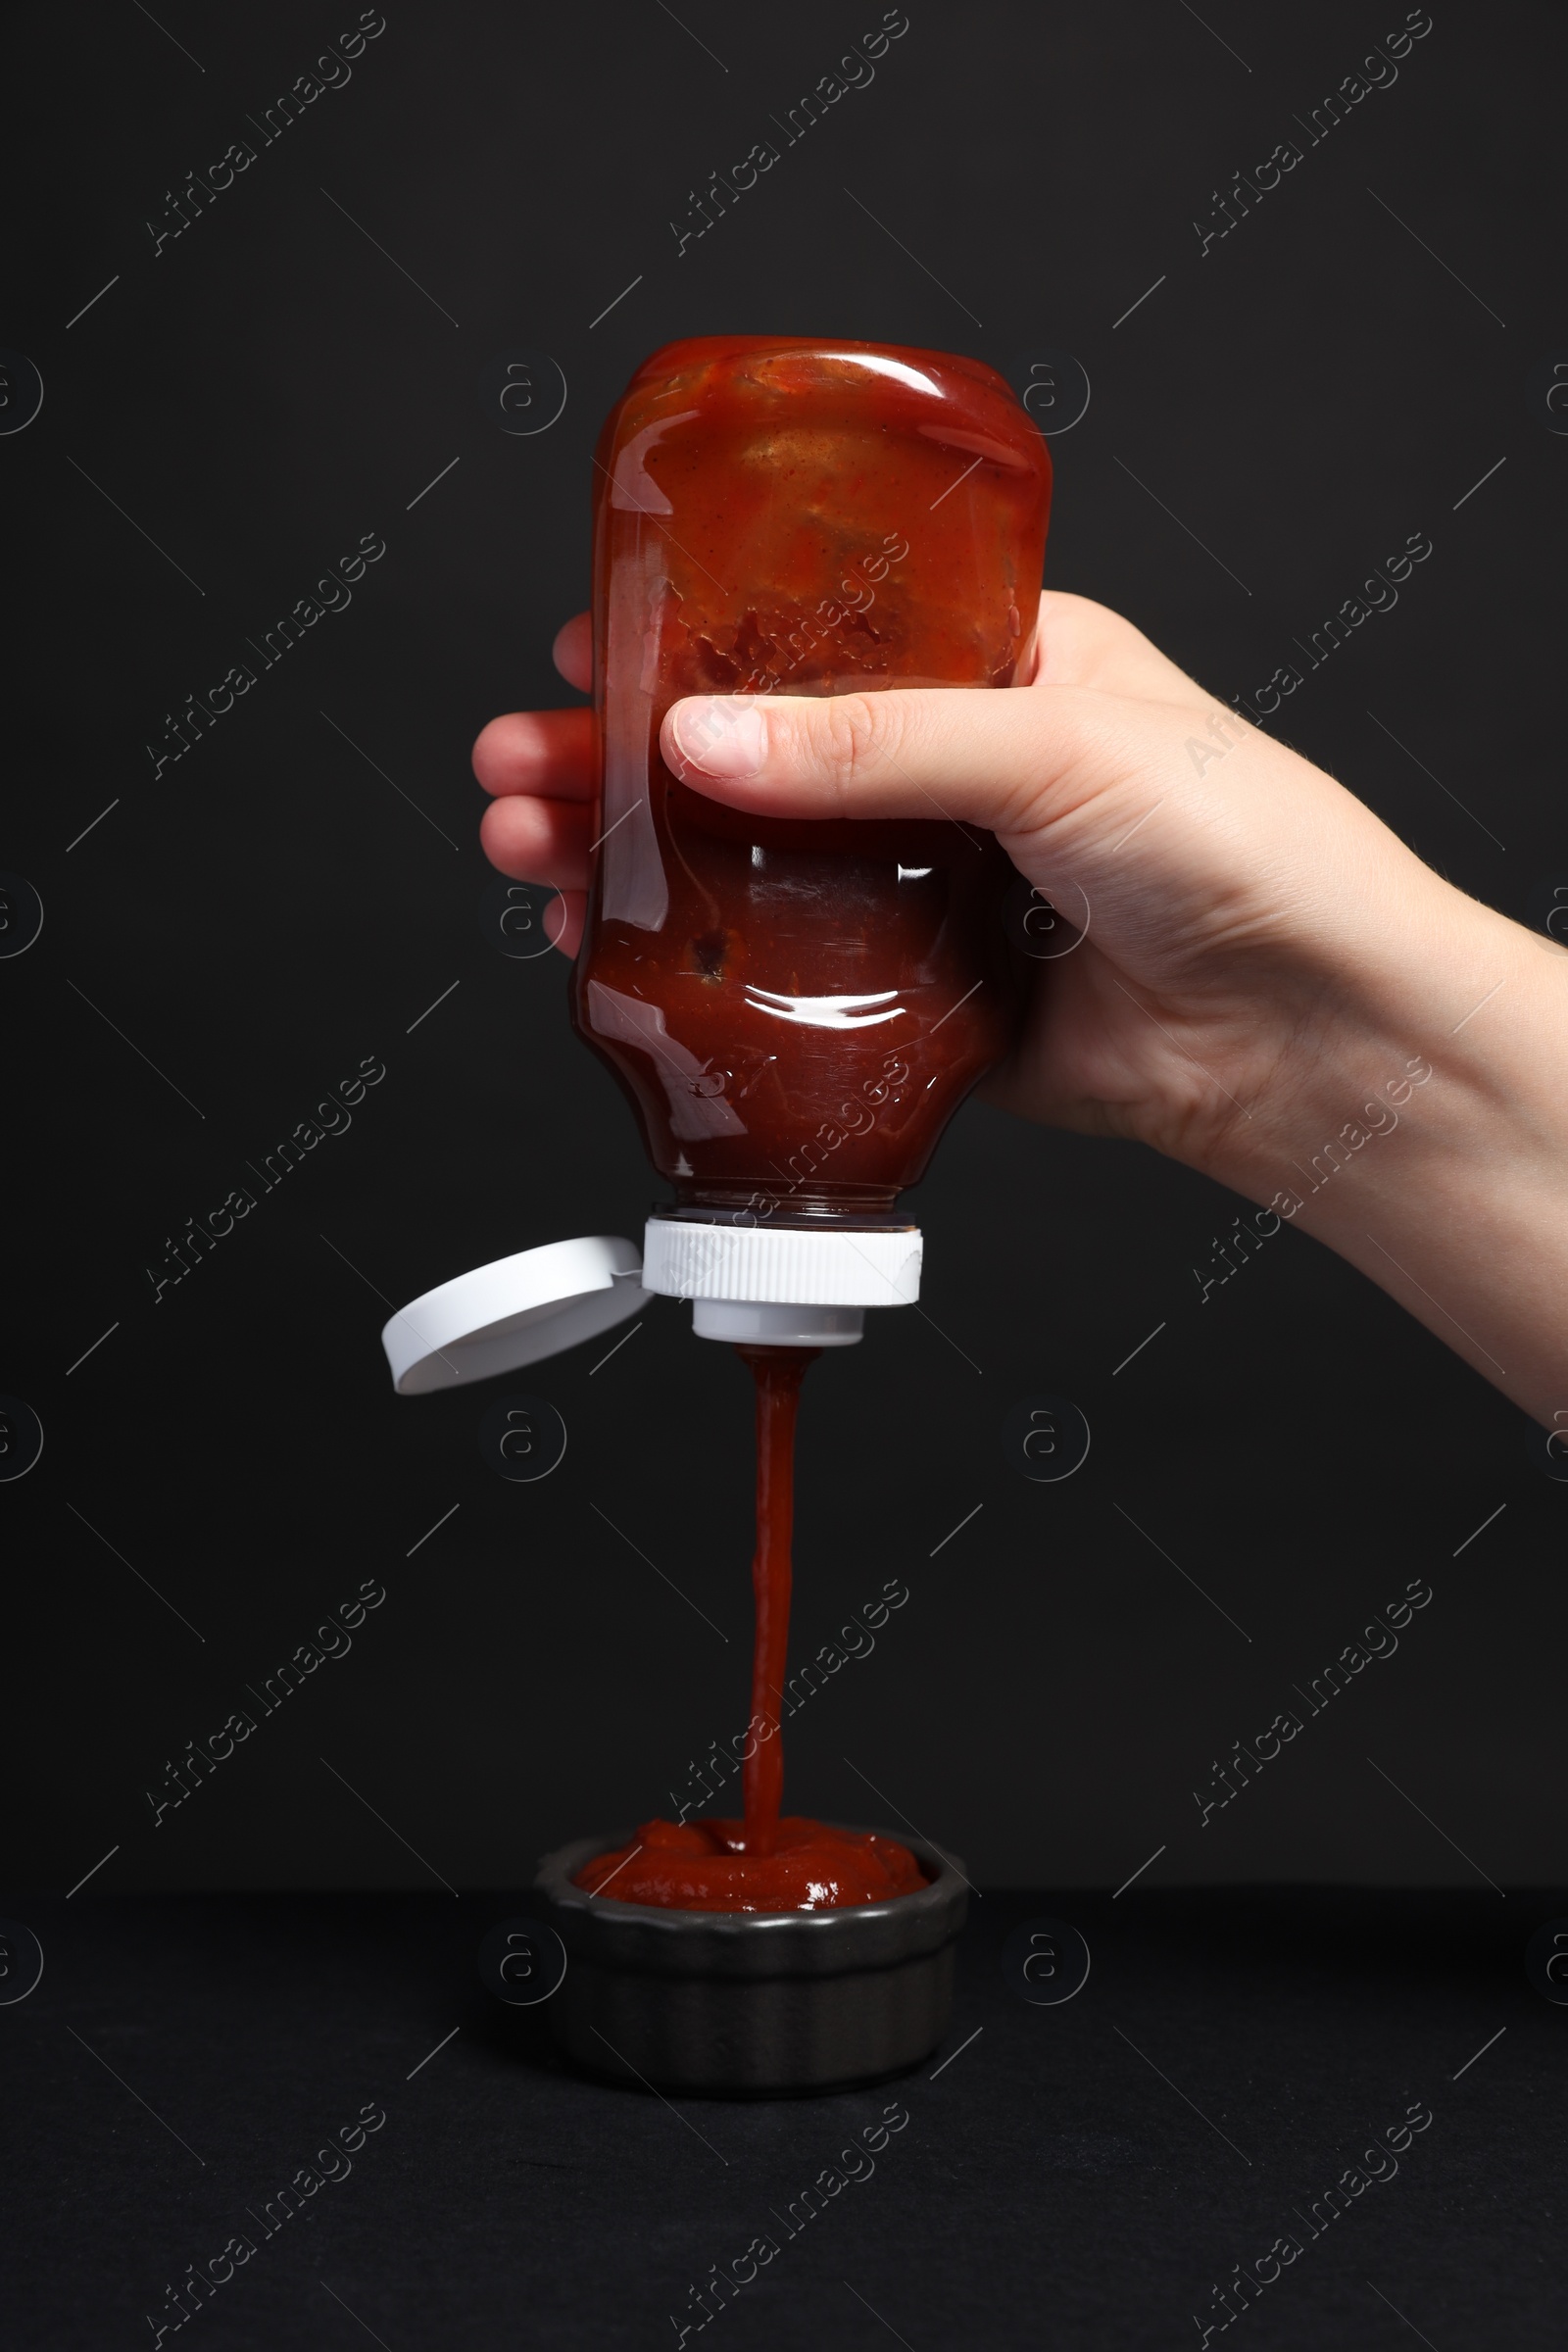 Photo of Woman pouring tasty ketchup from bottle into bowl against black background, closeup